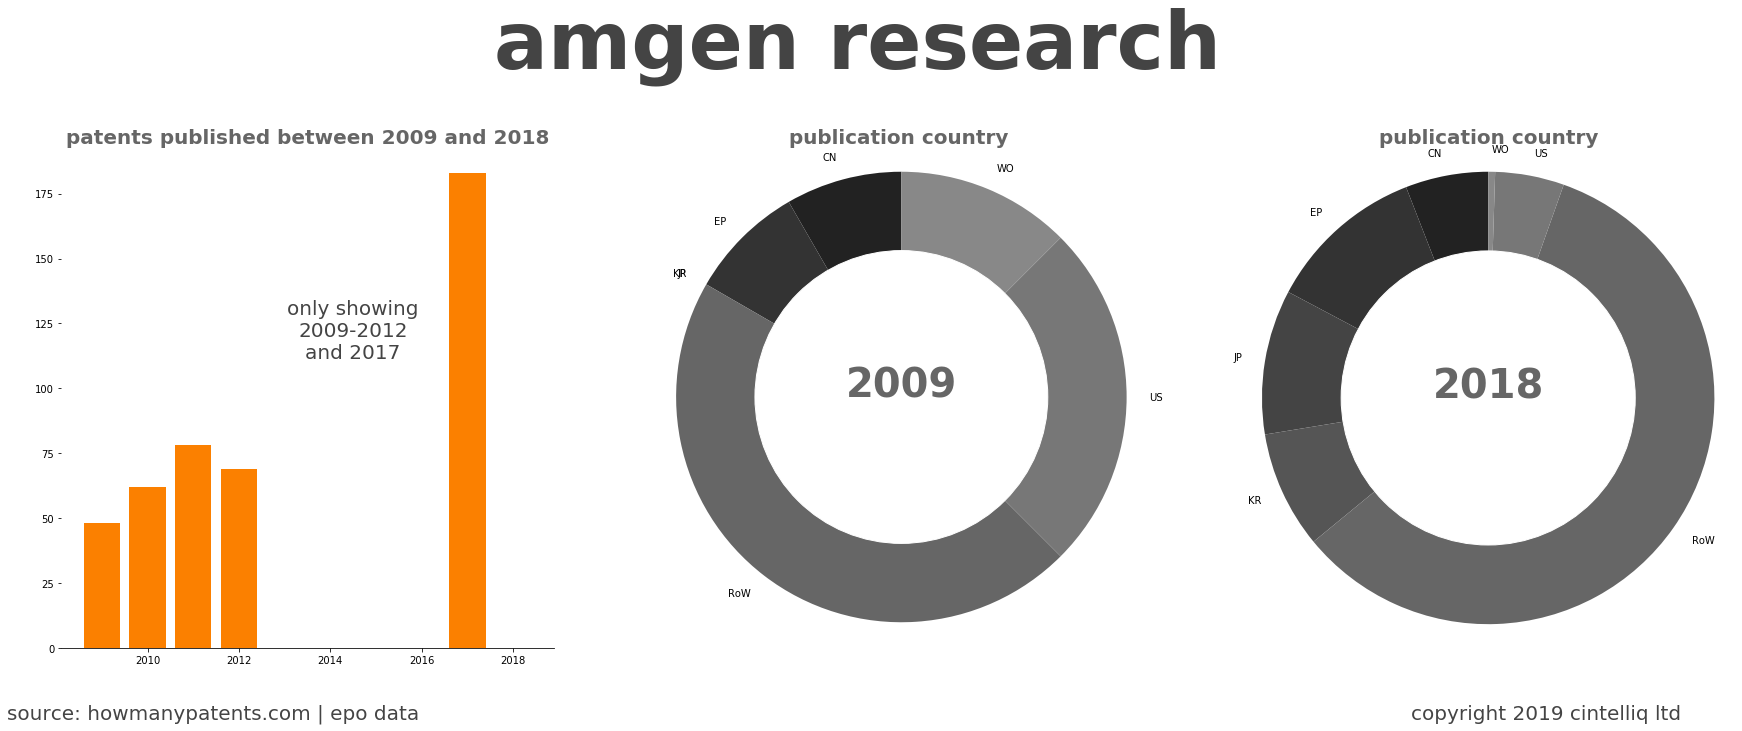 summary of patents for Amgen Research 